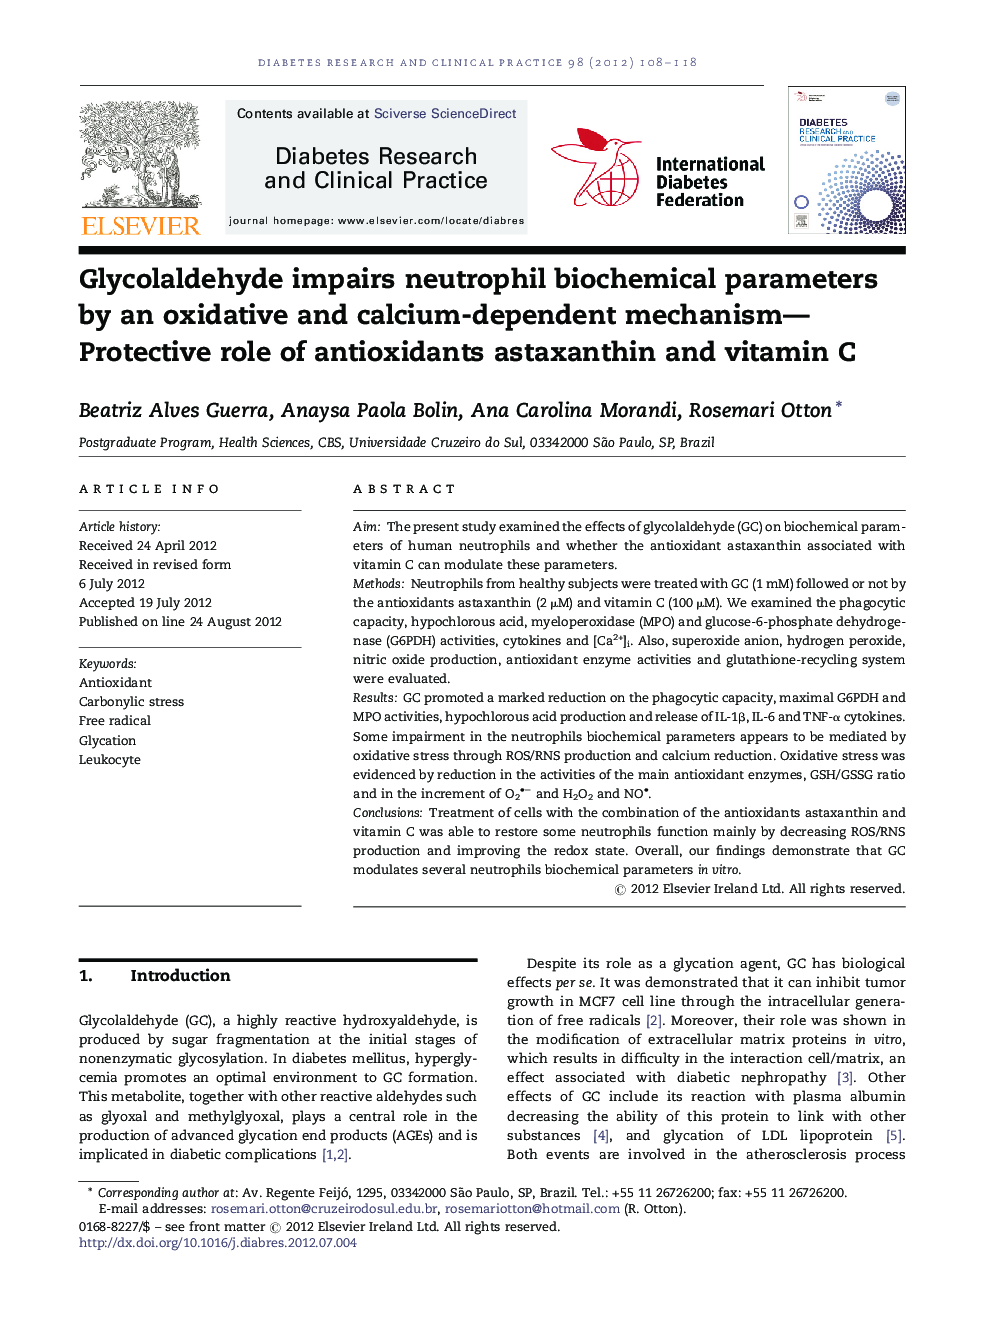 Glycolaldehyde impairs neutrophil biochemical parameters by an oxidative and calcium-dependent mechanism-Protective role of antioxidants astaxanthin and vitamin C